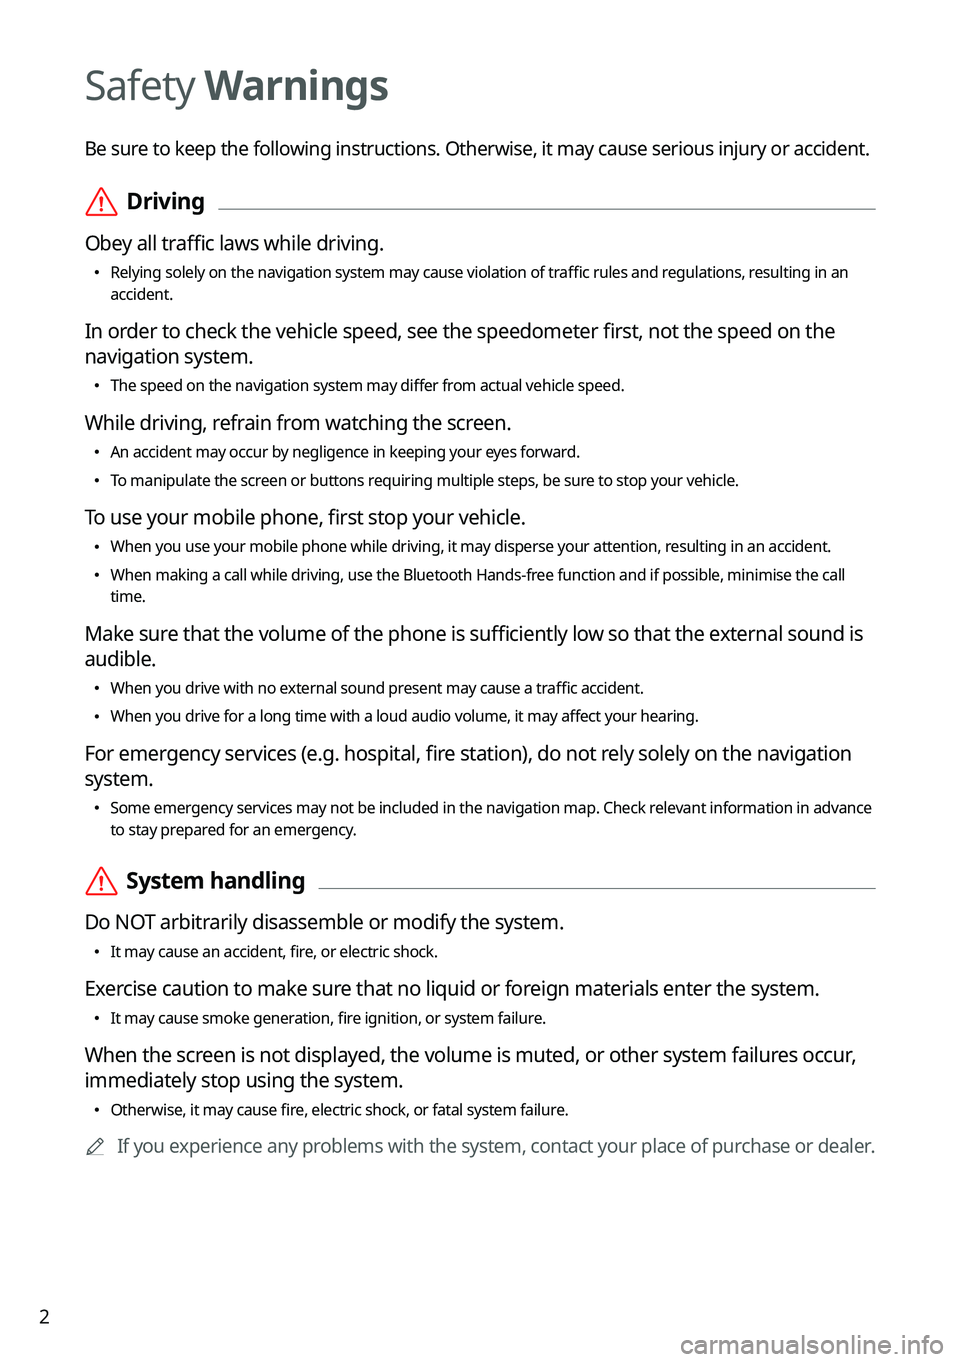 KIA EV6 2022  Navigation System Quick Reference Guide 2
Safety Warnings
Be sure to keep the following instructions. Otherwise, it may cause serious injury or accident.
 ÝDriving
Obey all traffic laws while driving.
 •
Relying solely on the navigation 